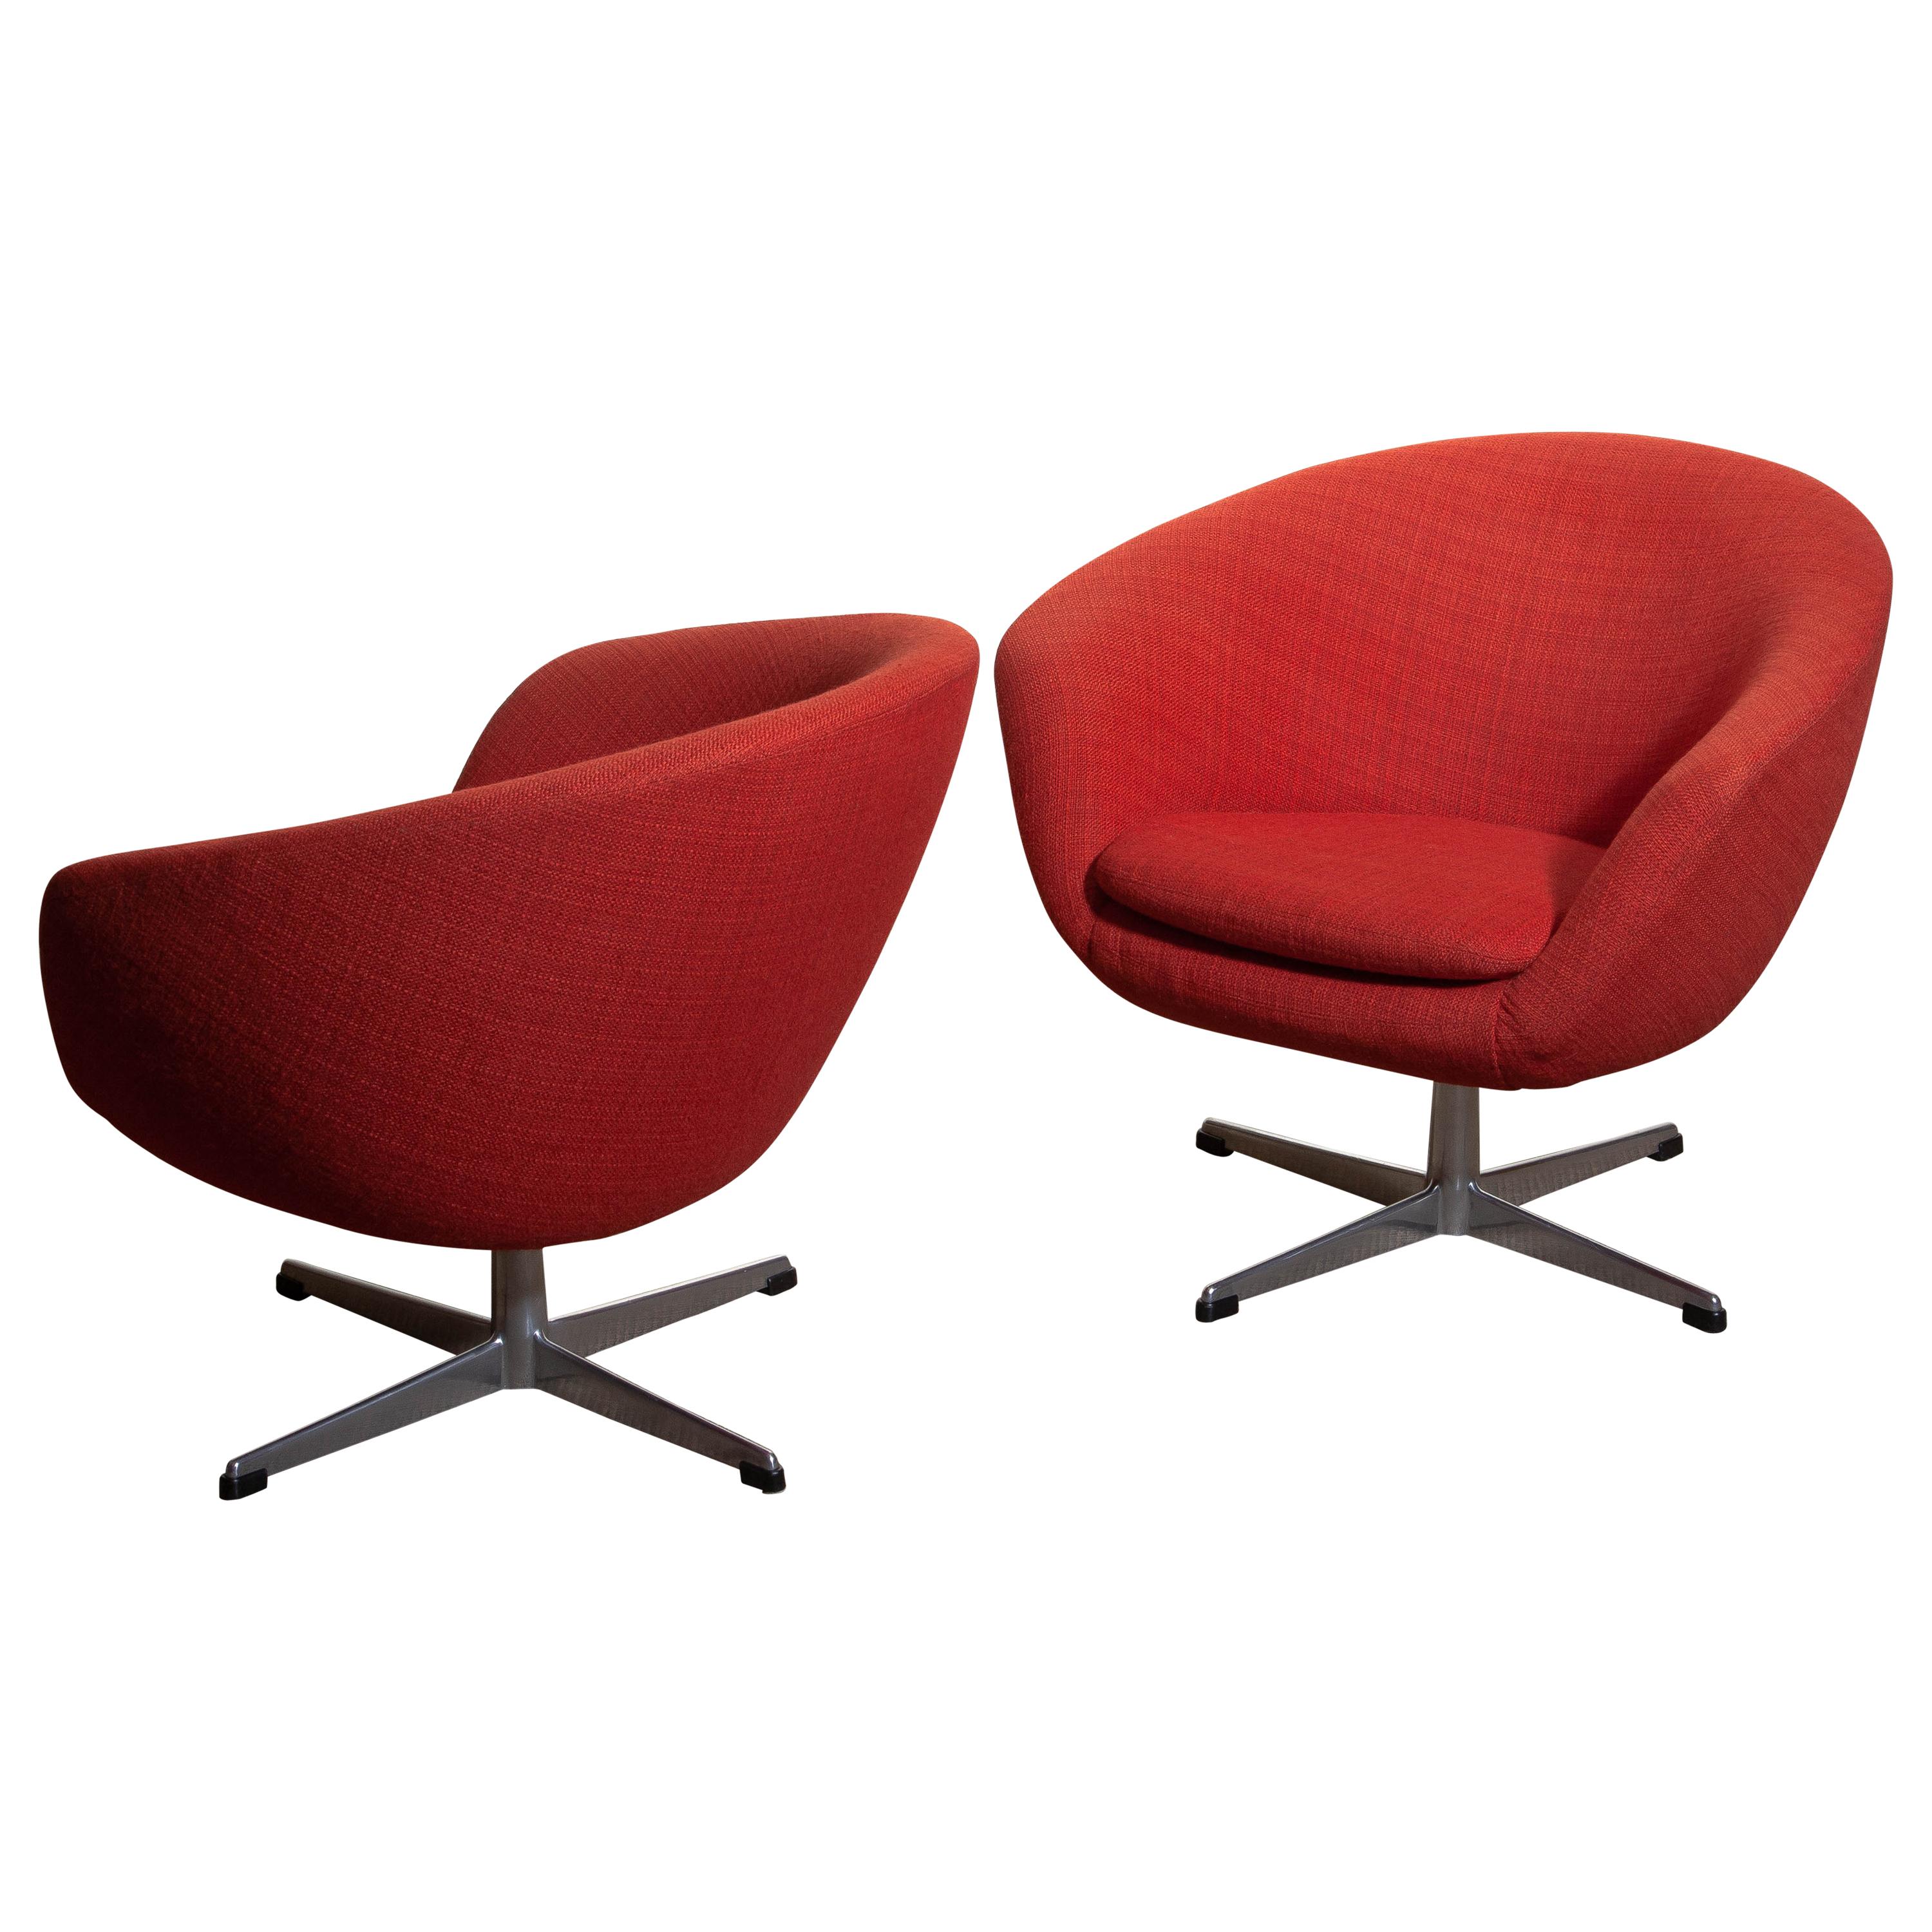 1960s, Pair of Swivel Lounge Chairs by Carl Eric Klote for Overman, Denmark